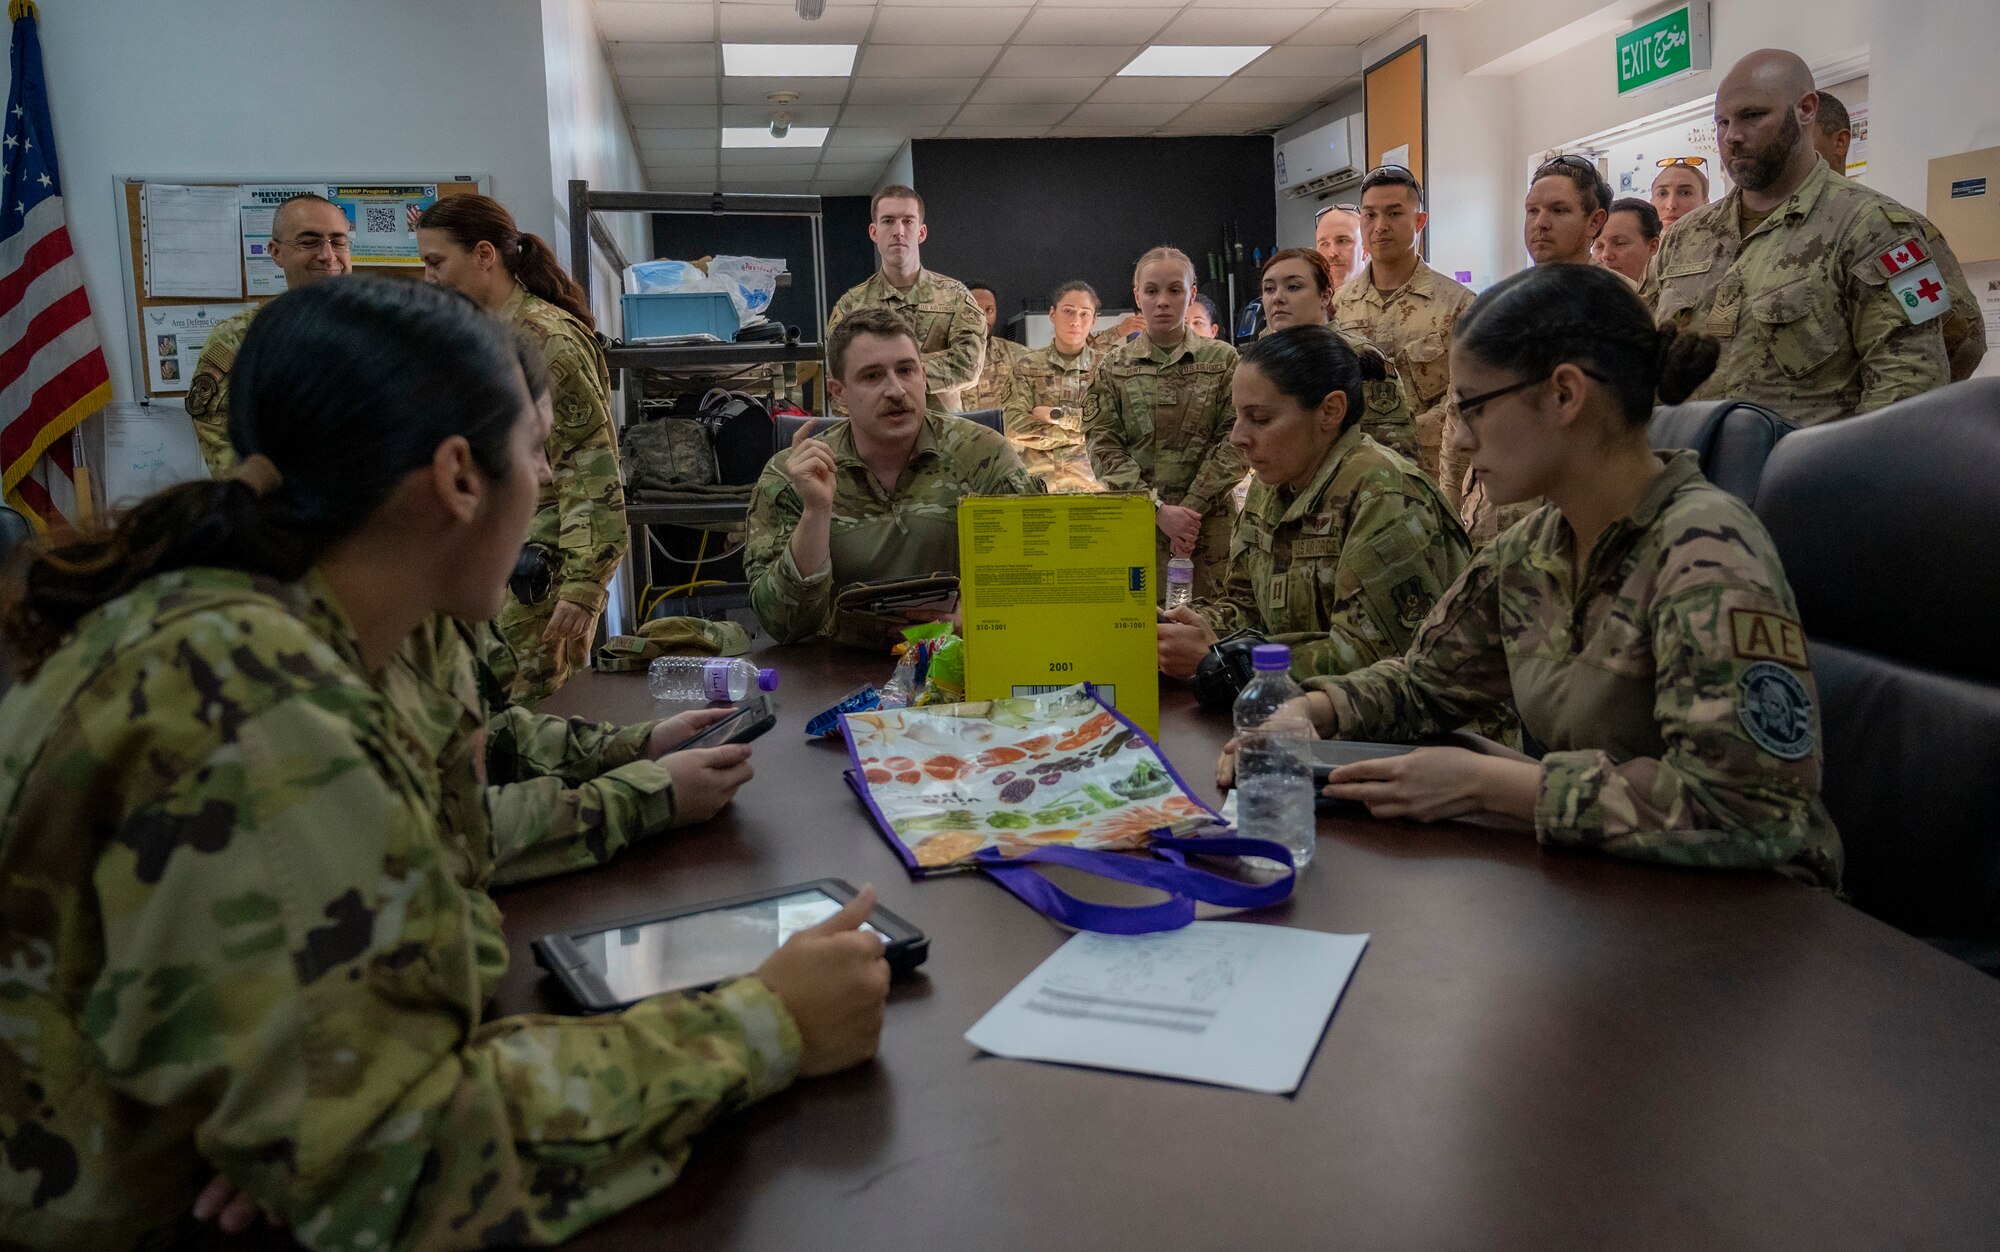 U.S. Air Force Airmen and coalition partners are briefed on a simulated event before medical evacuation training at Ali Al Salem Air Base, Kuwait, Jan. 20, 2023.